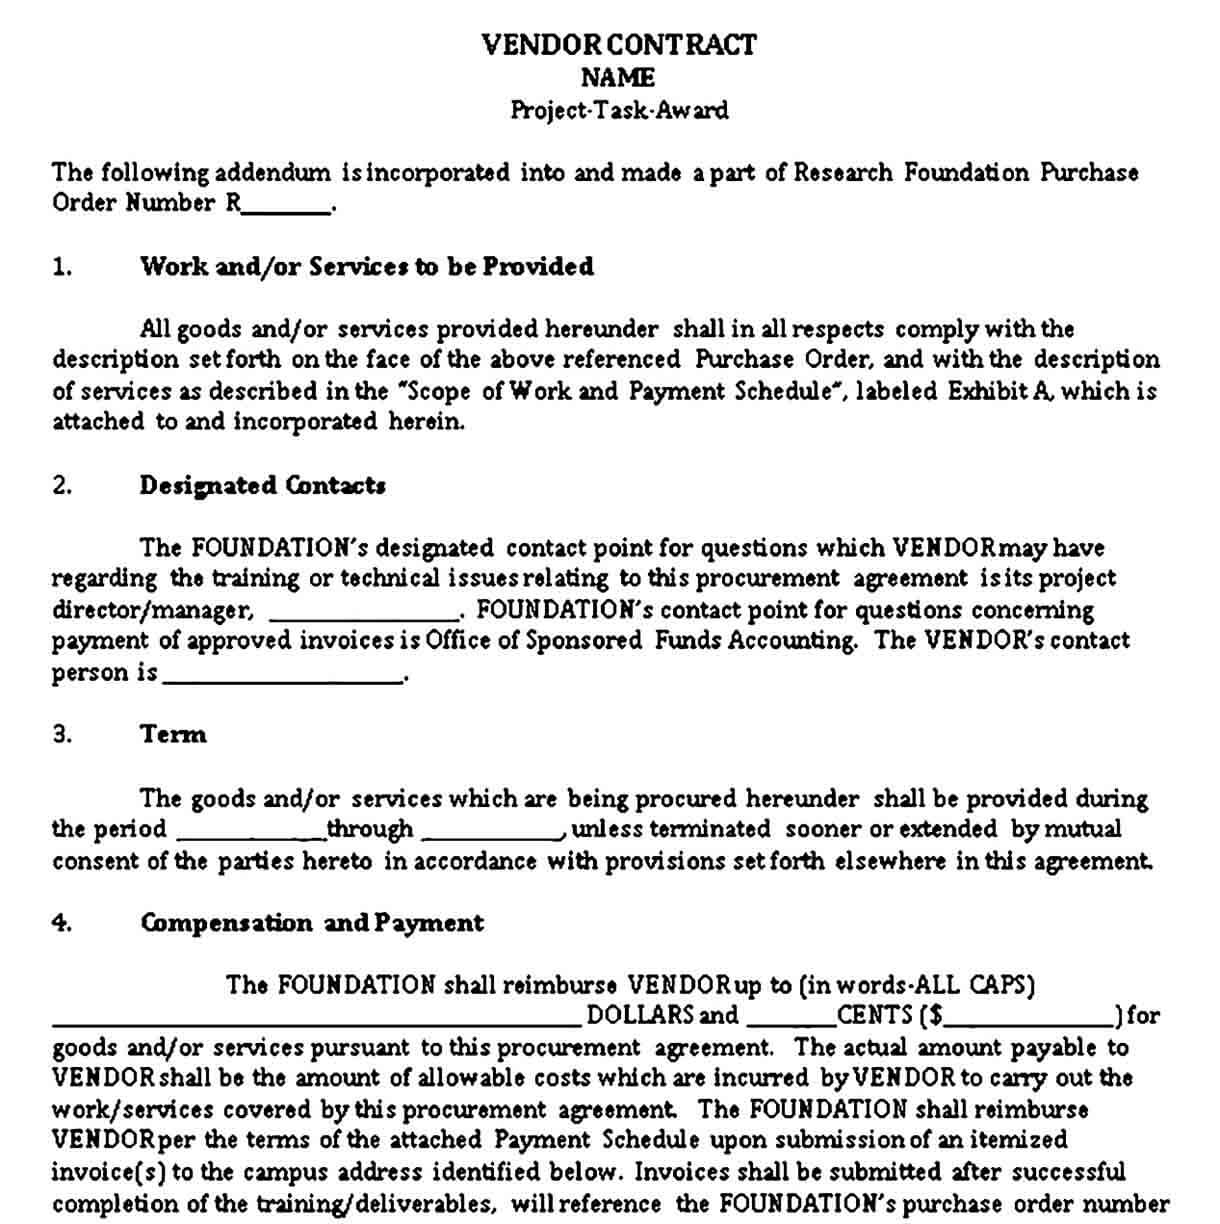 Vendor Contract Agreement Template